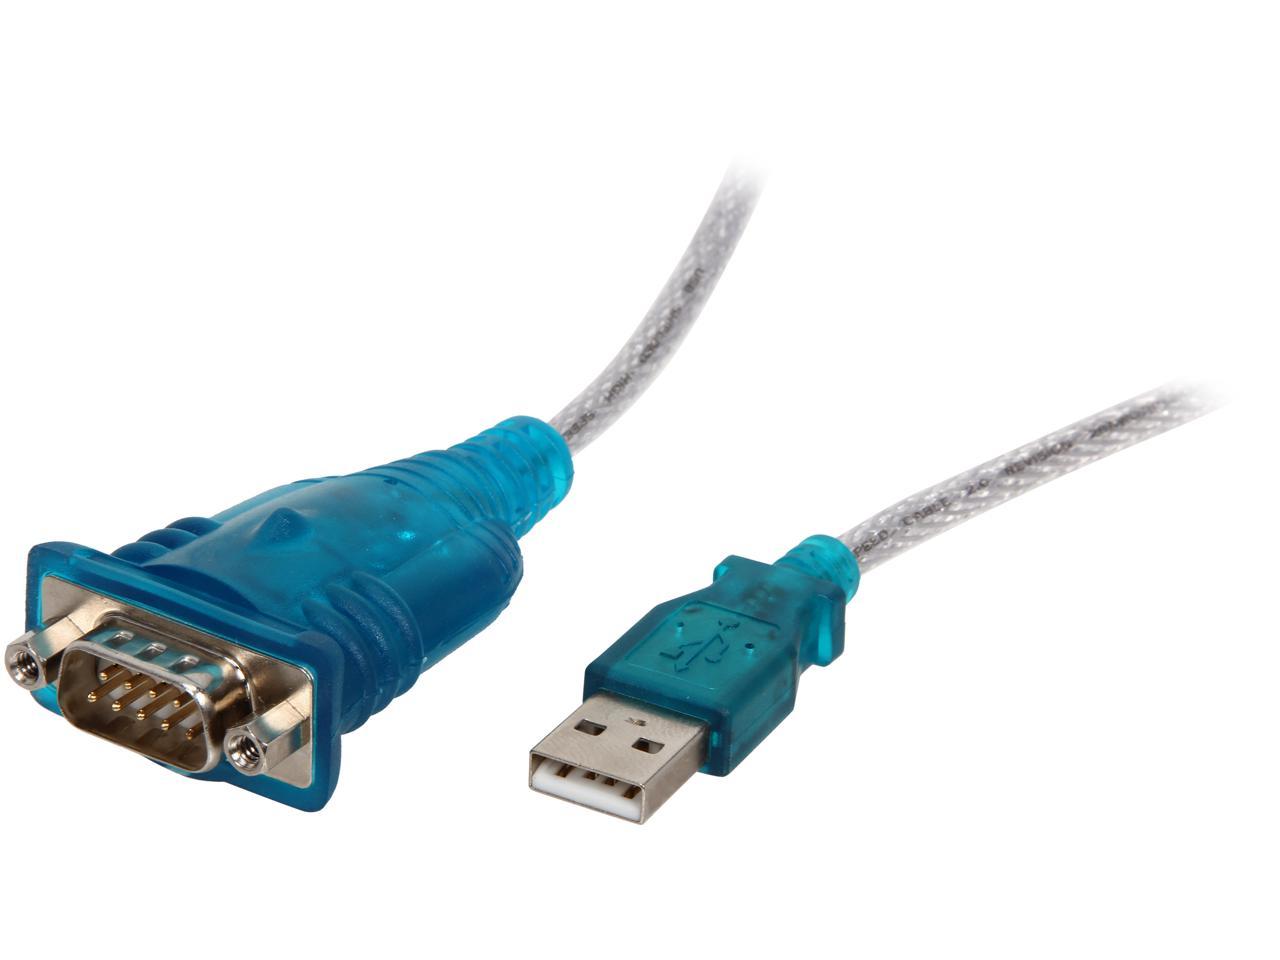 prolific usb to serial comm port 7